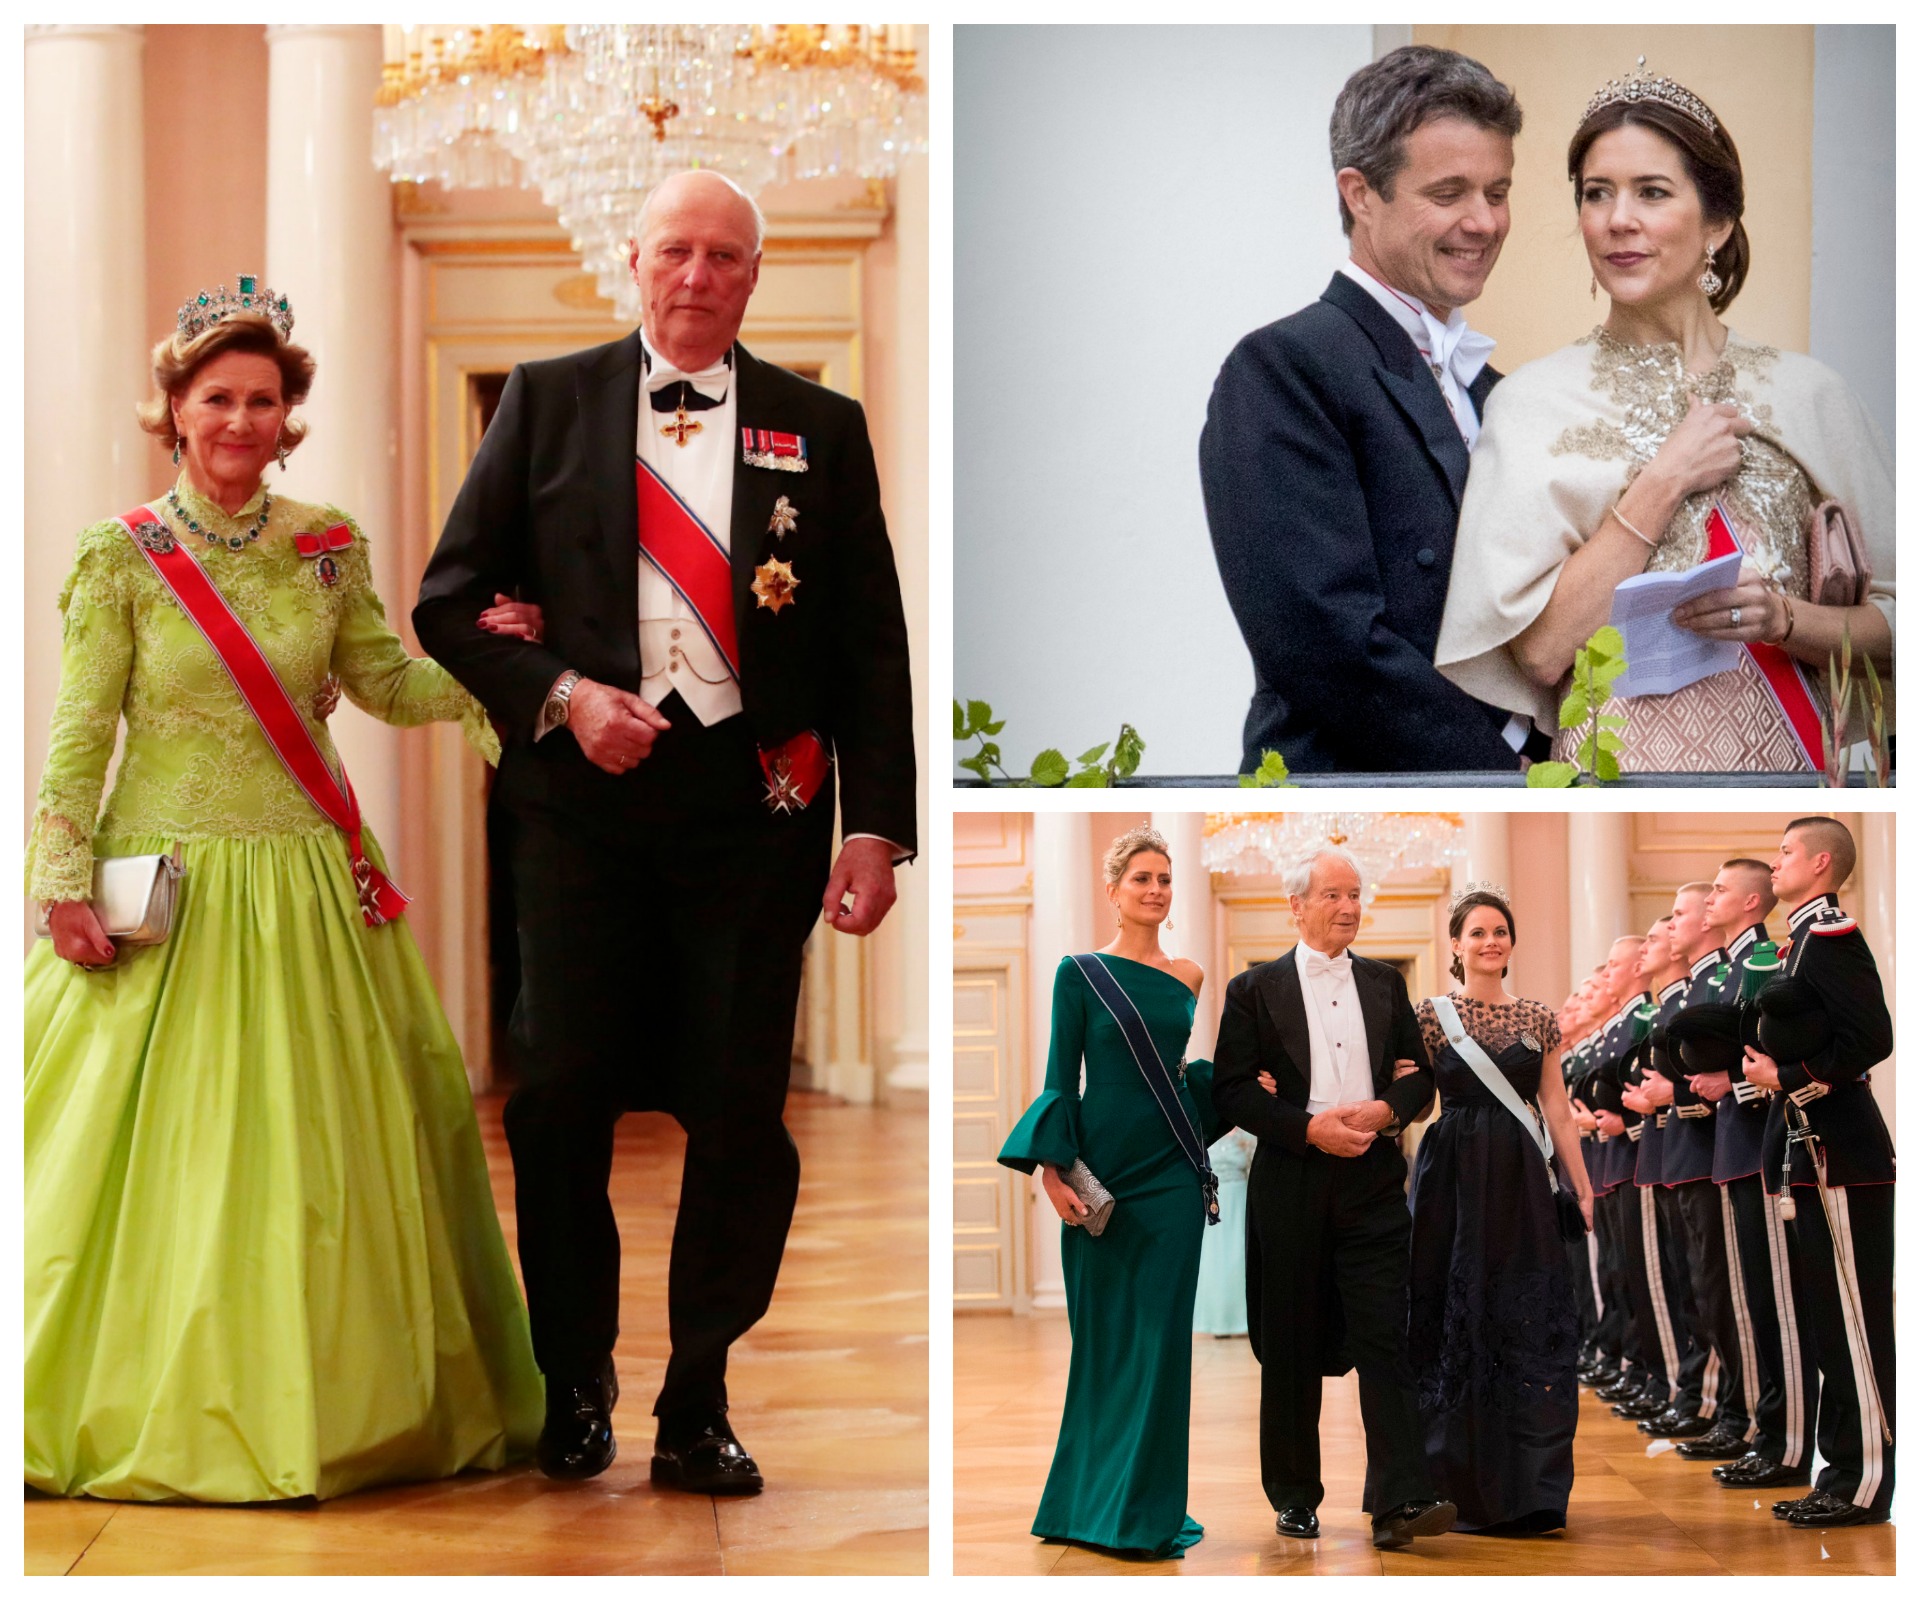 Norway’s King Harald and Queen Sonja celebrate their birthdays with a dazzling array of royals